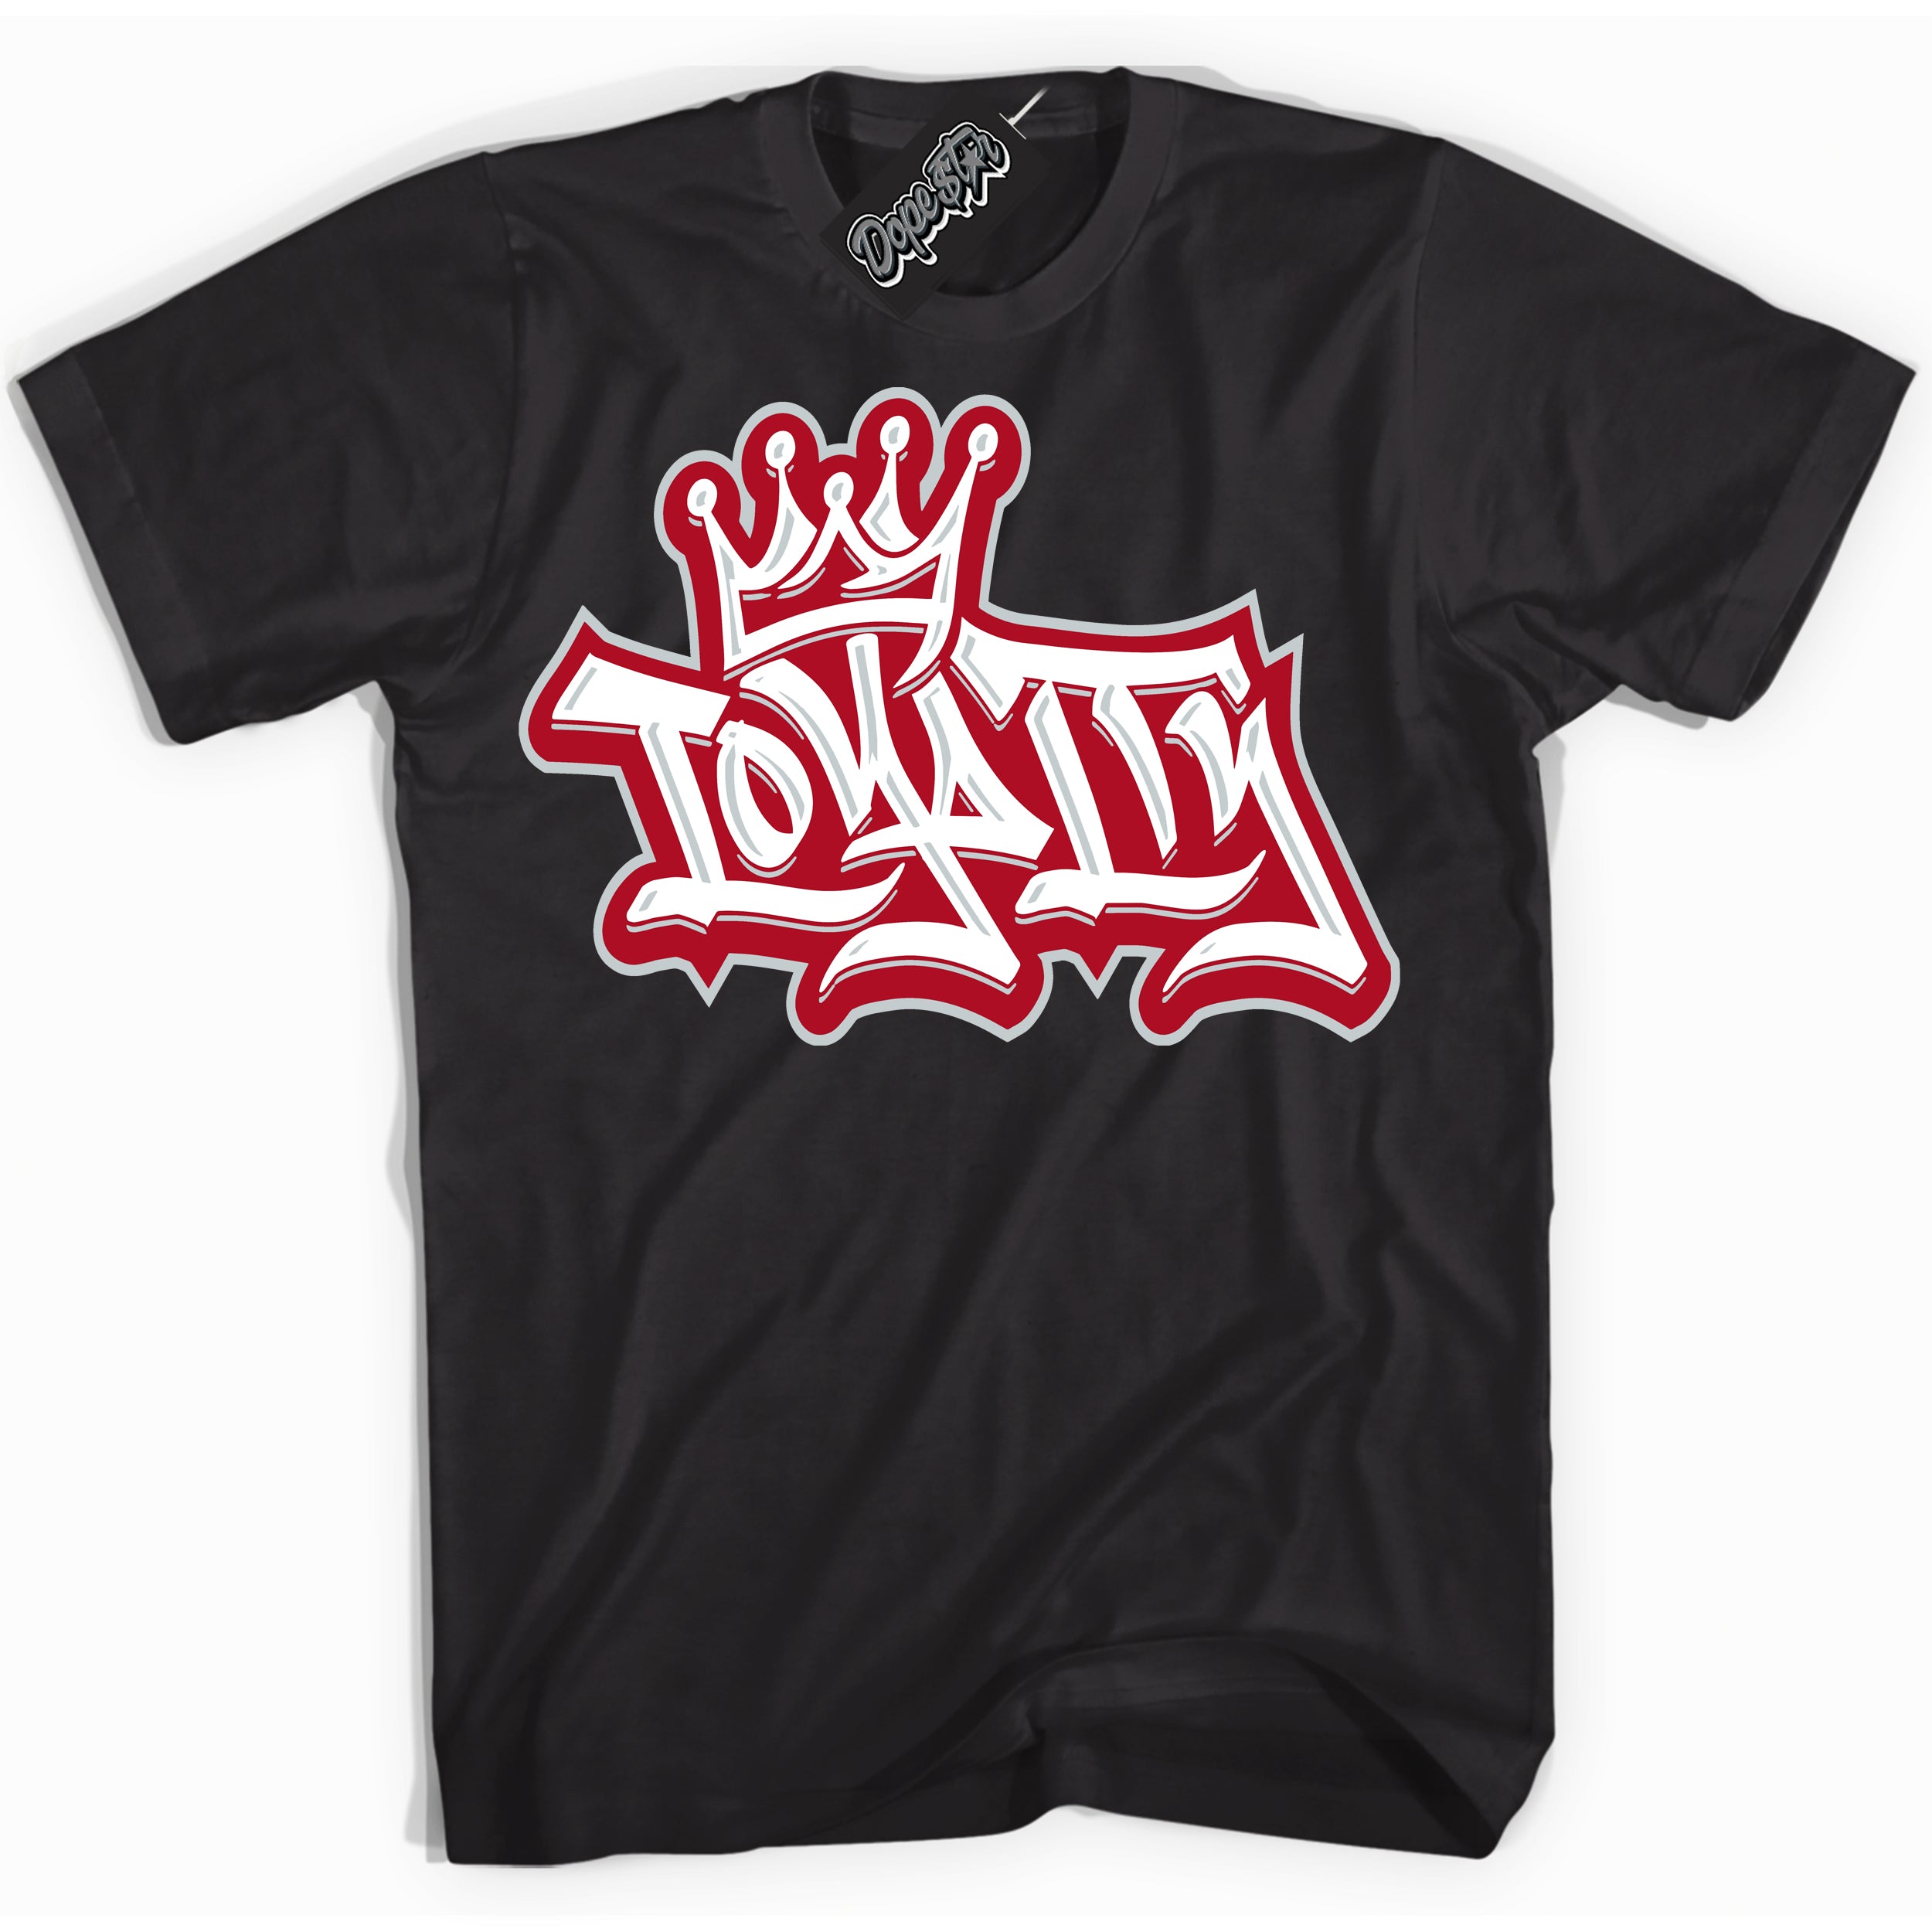 Cool Black Shirt with “ Loyalty Crown” design that perfectly matches Reverse Ultraman Sneakers.